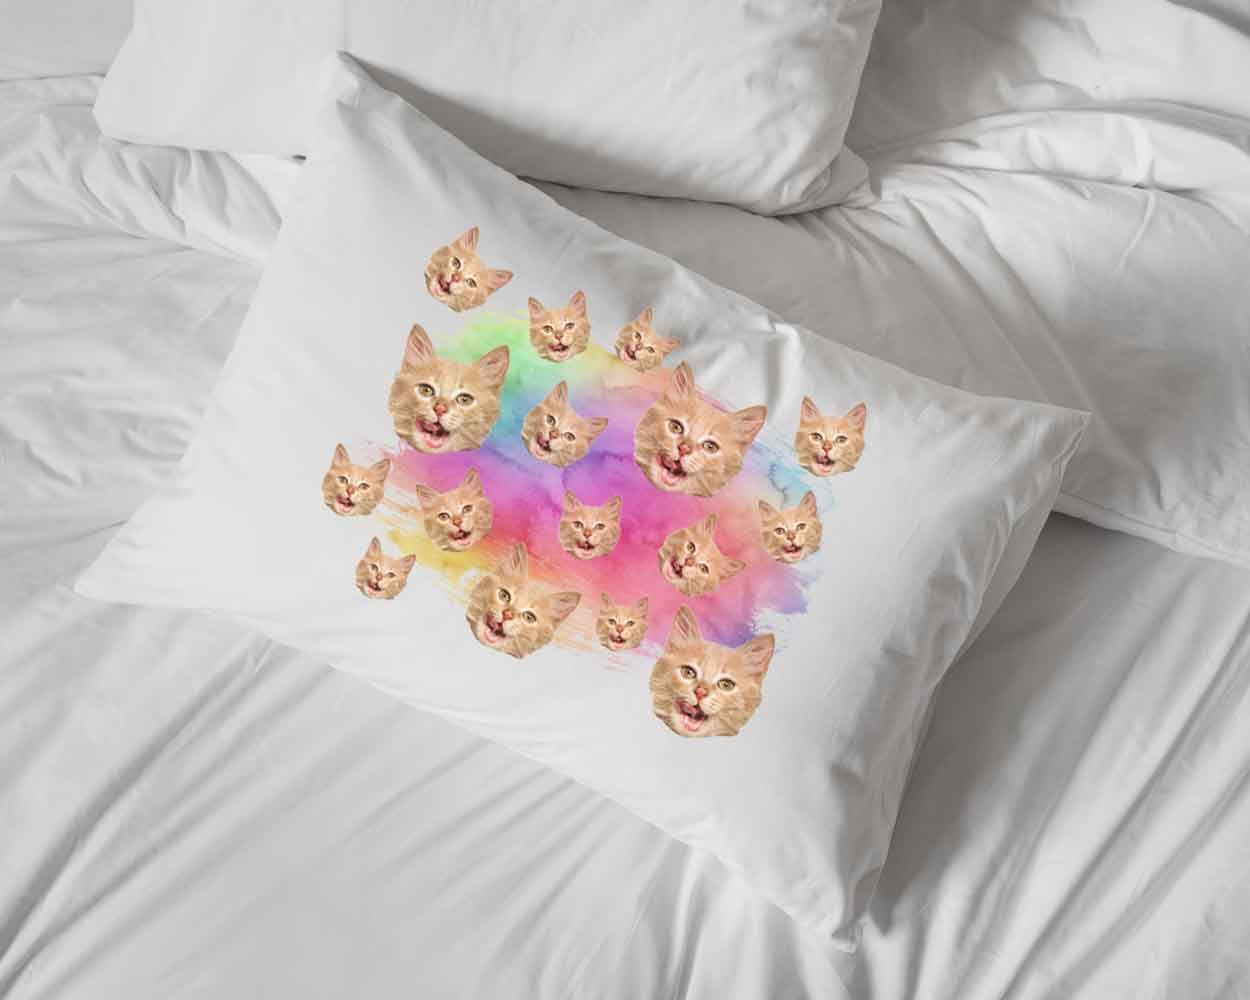 Custom printed and personalized with your pets face cropped in all over design with rainbow wash background digitally printed on the white cotton pillowcase.